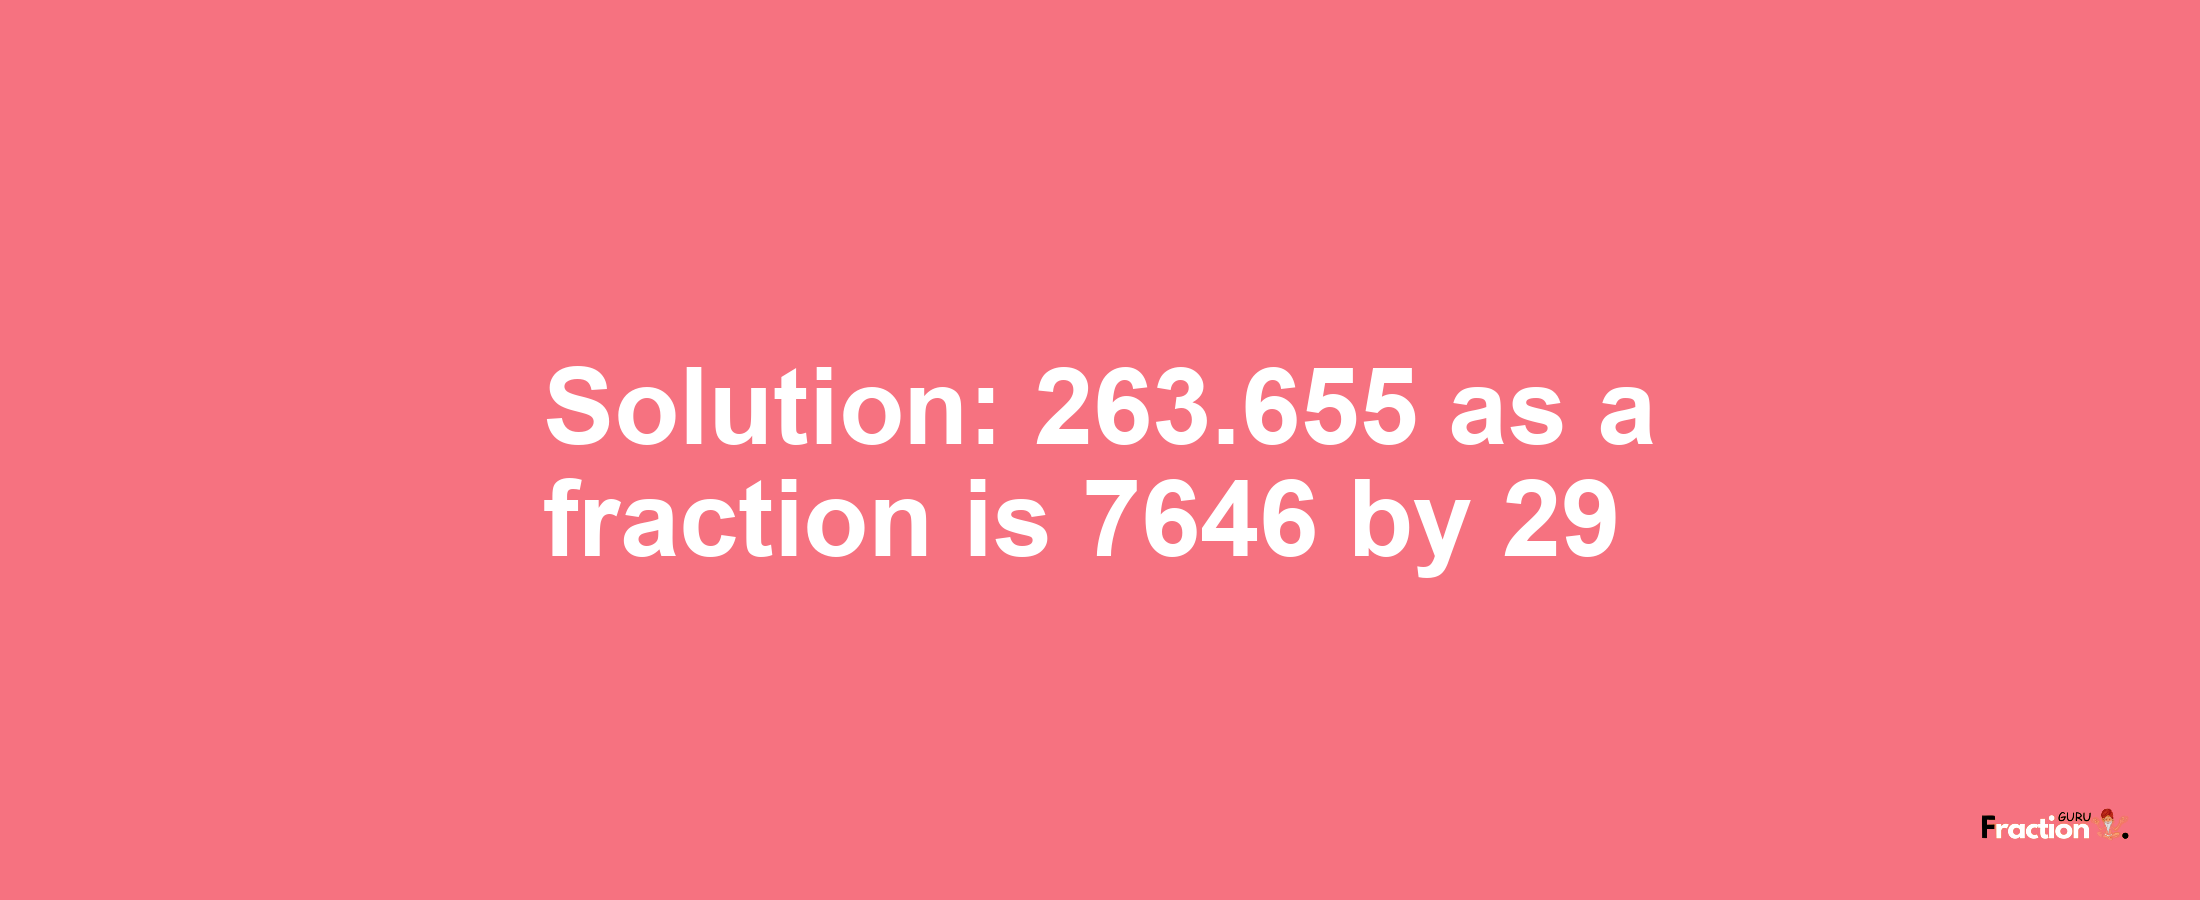 Solution:263.655 as a fraction is 7646/29